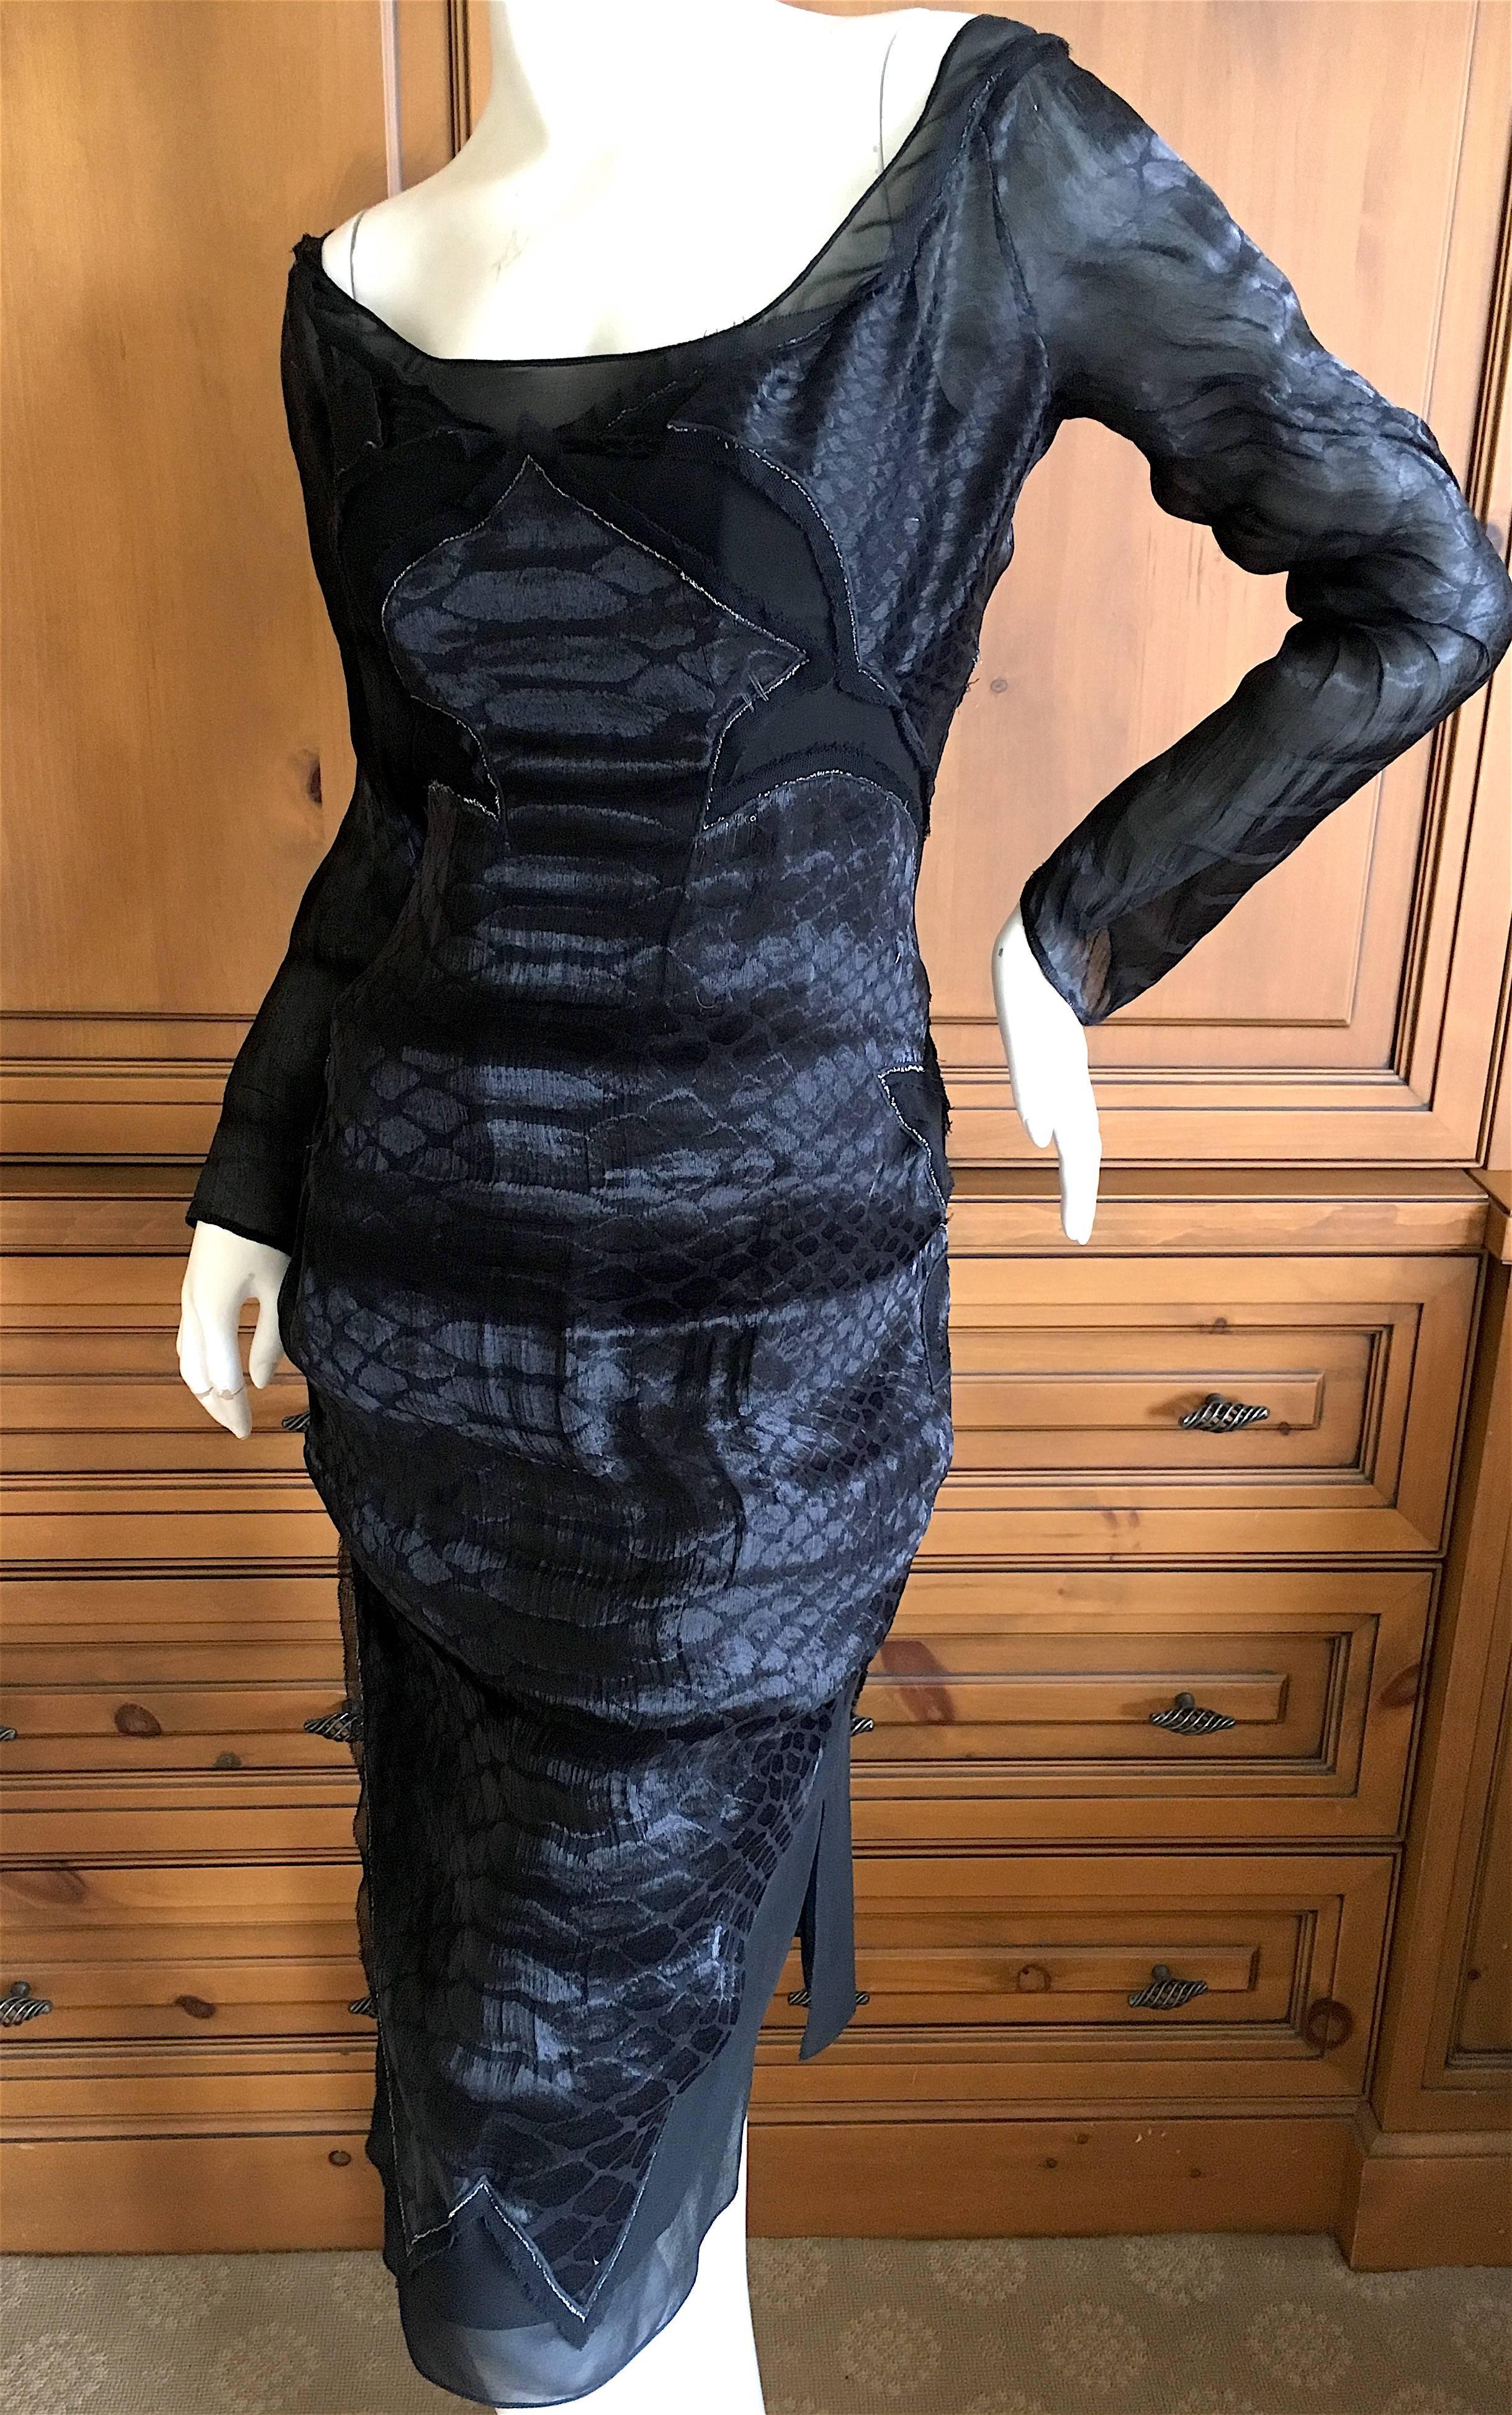 Yves Saint Laurent by Tom Ford Reptile Print Black Dress Fall 2004 For Sale 4